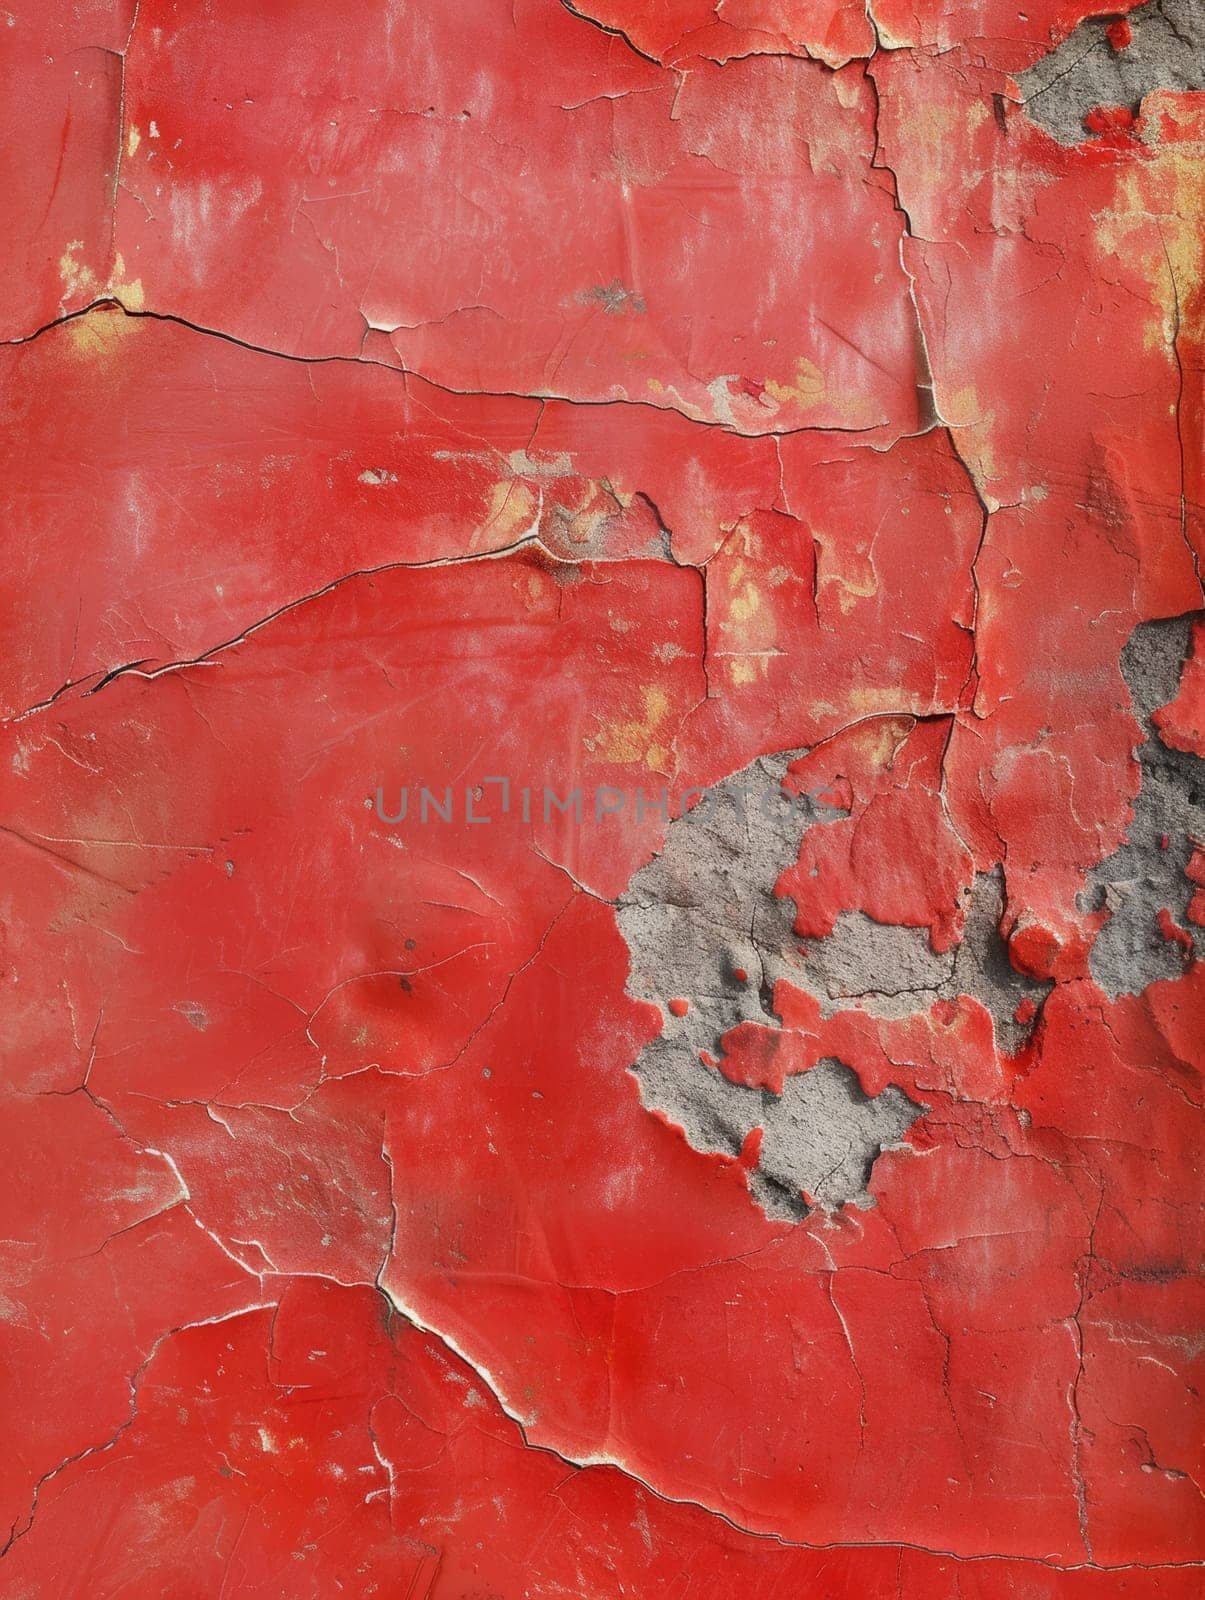 Distressed red painted surface showing cracks and wear, evoking a sense of decay and texture. by sfinks